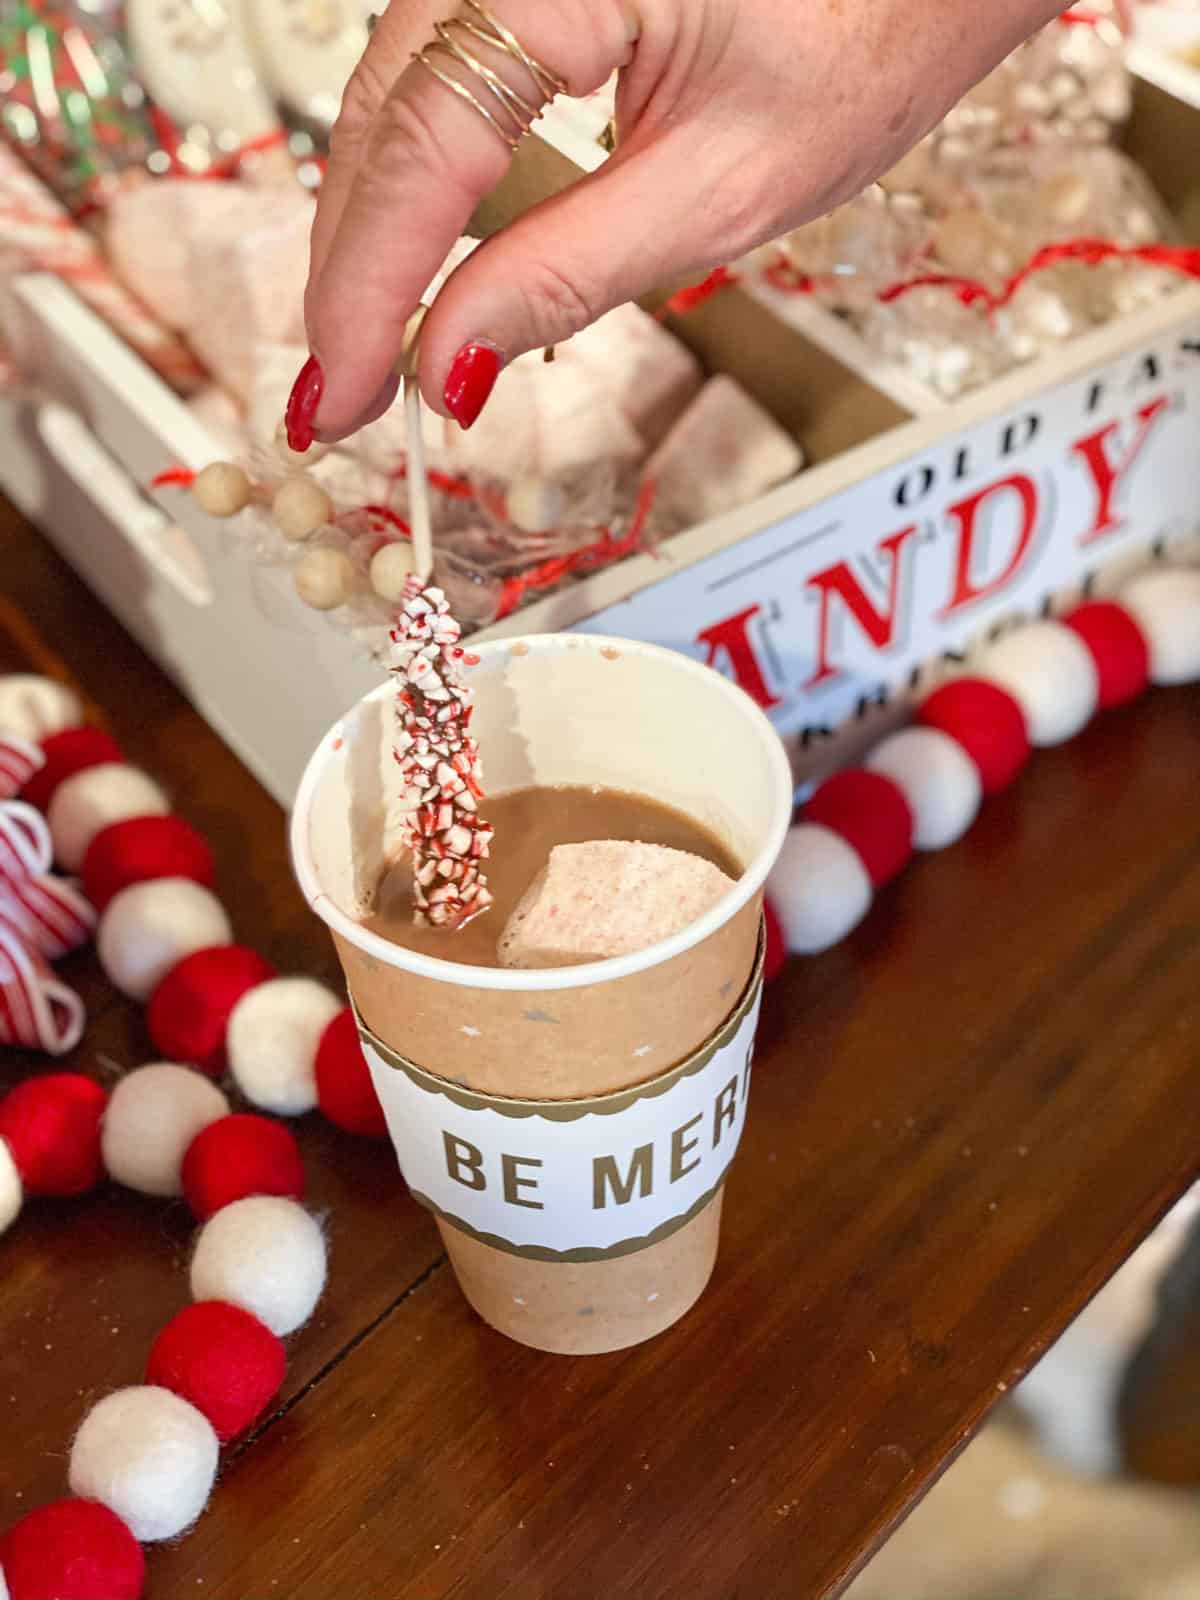 Peppermint covered chocolate stick being dipped into hot cocoa